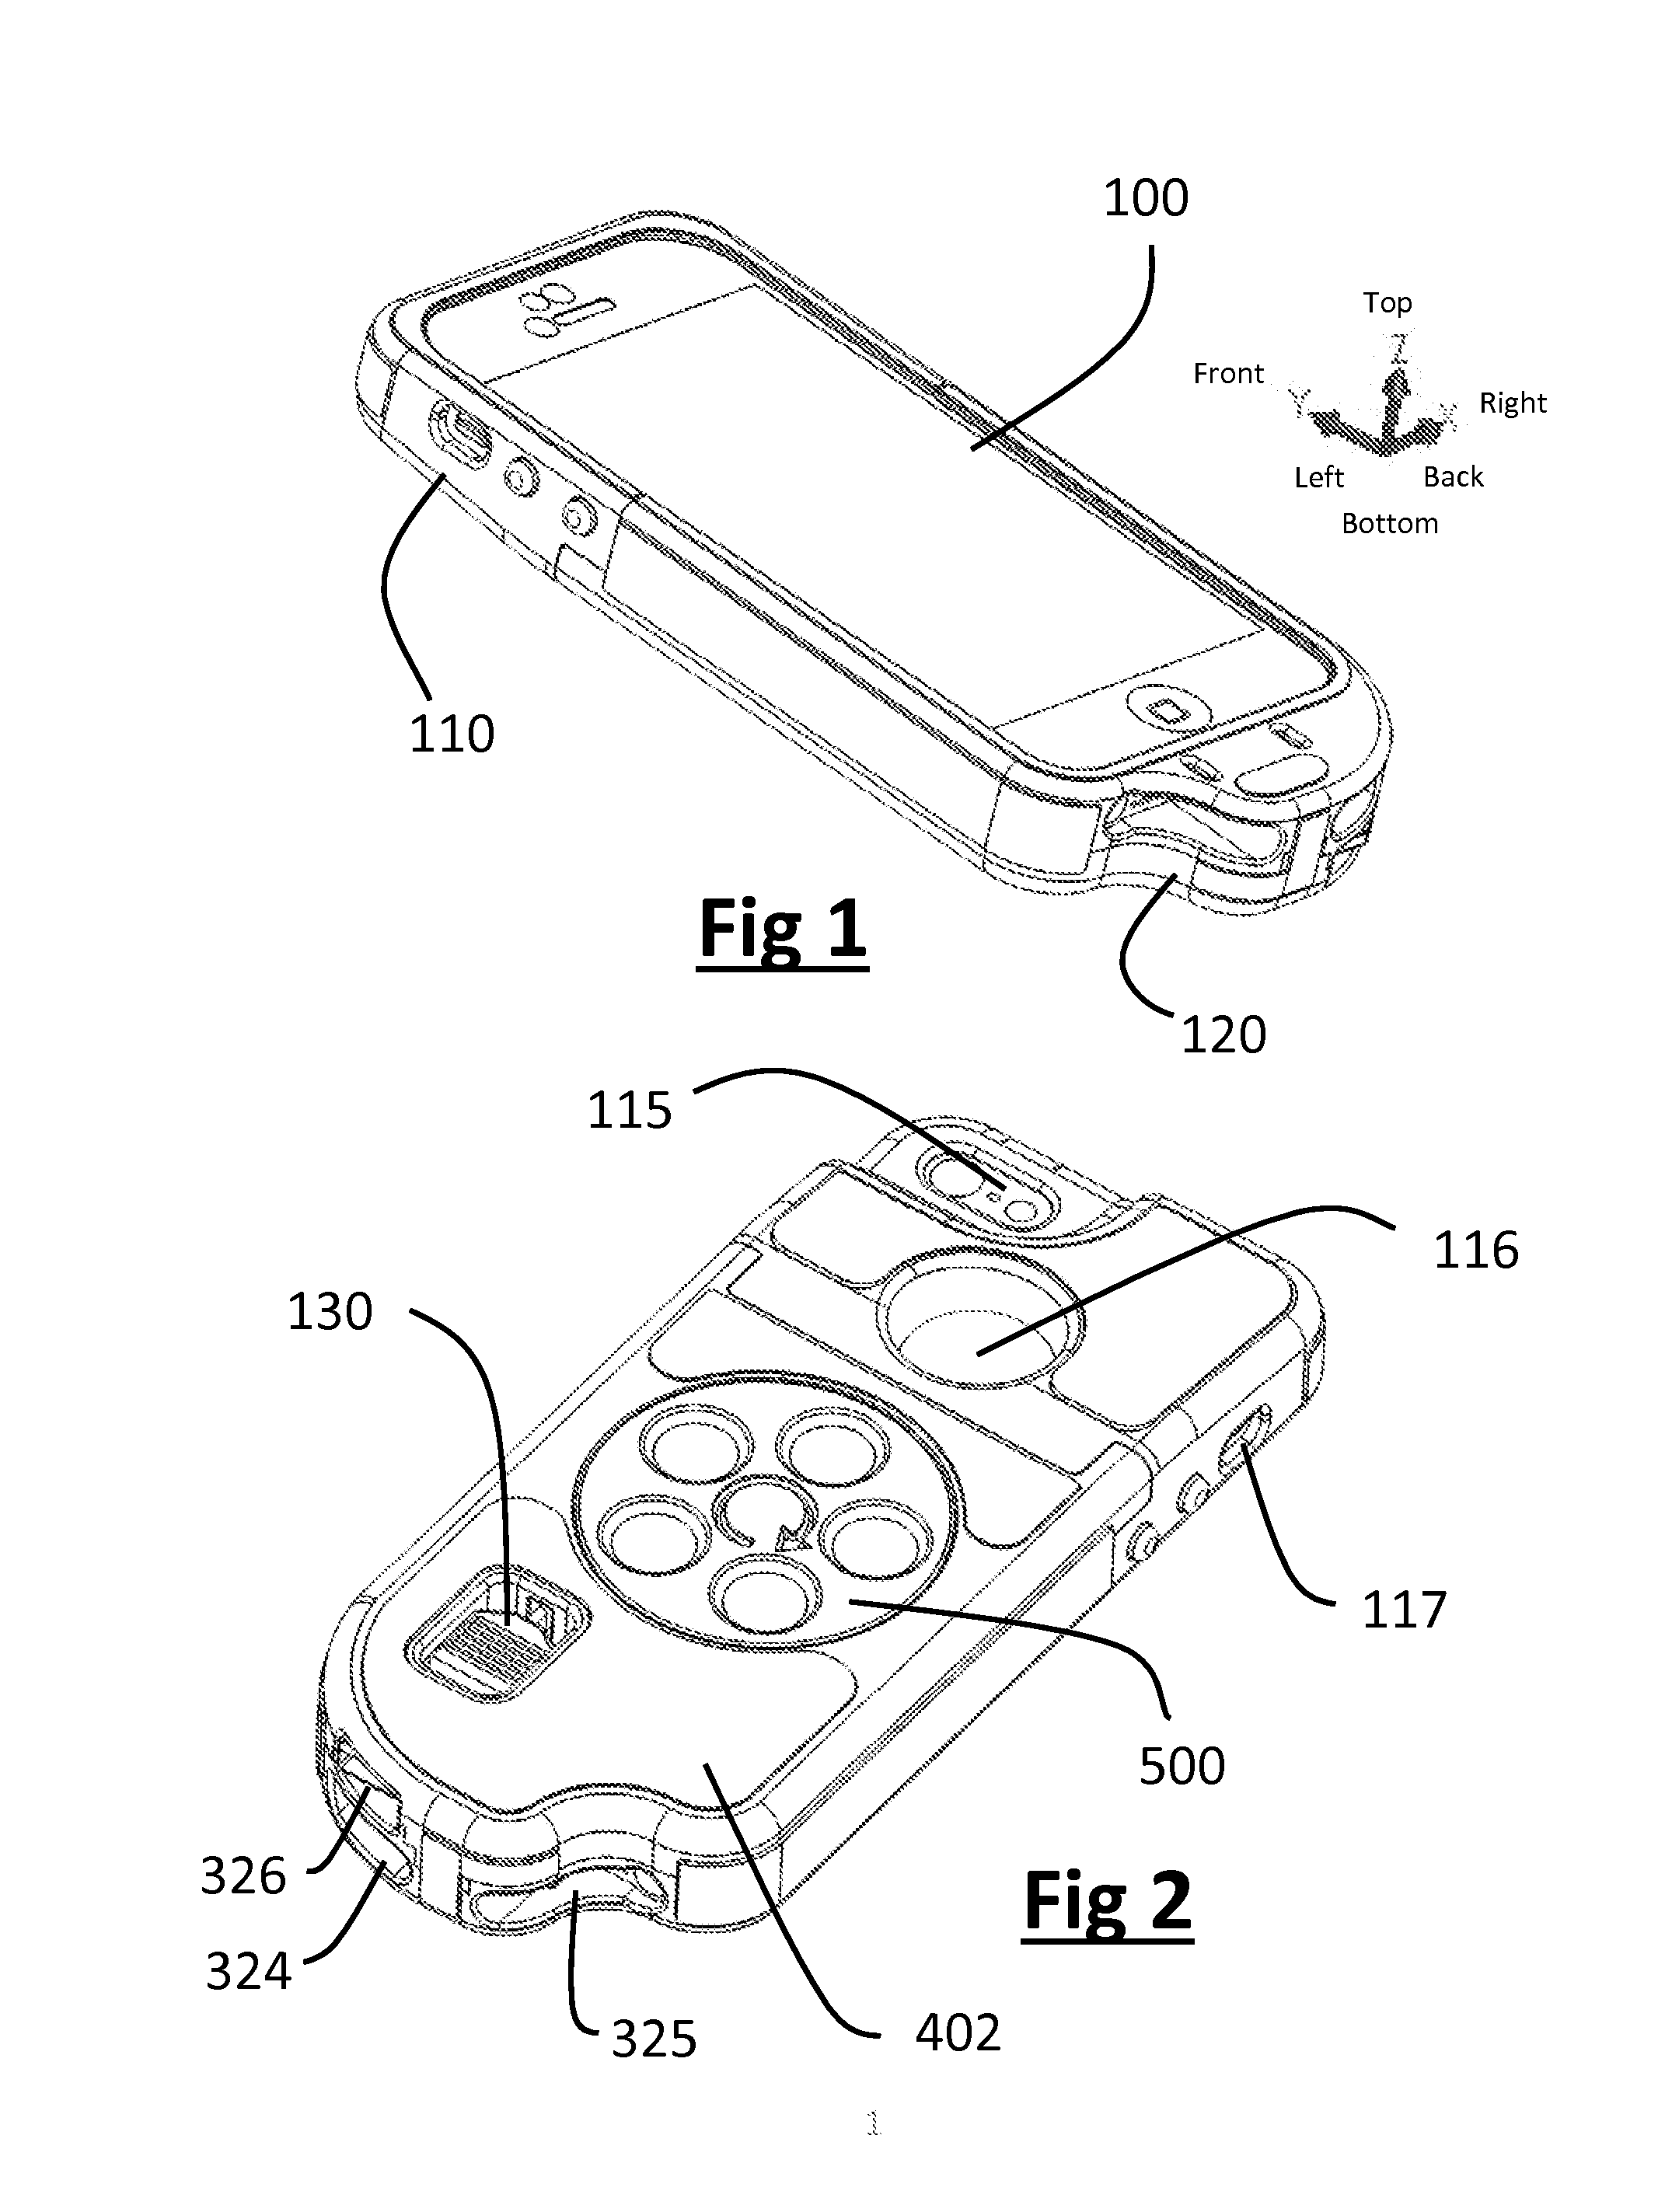 Protective Case for Portable Electronic Device with Integrated Dispensable and Retractable Charge and Sync Cable